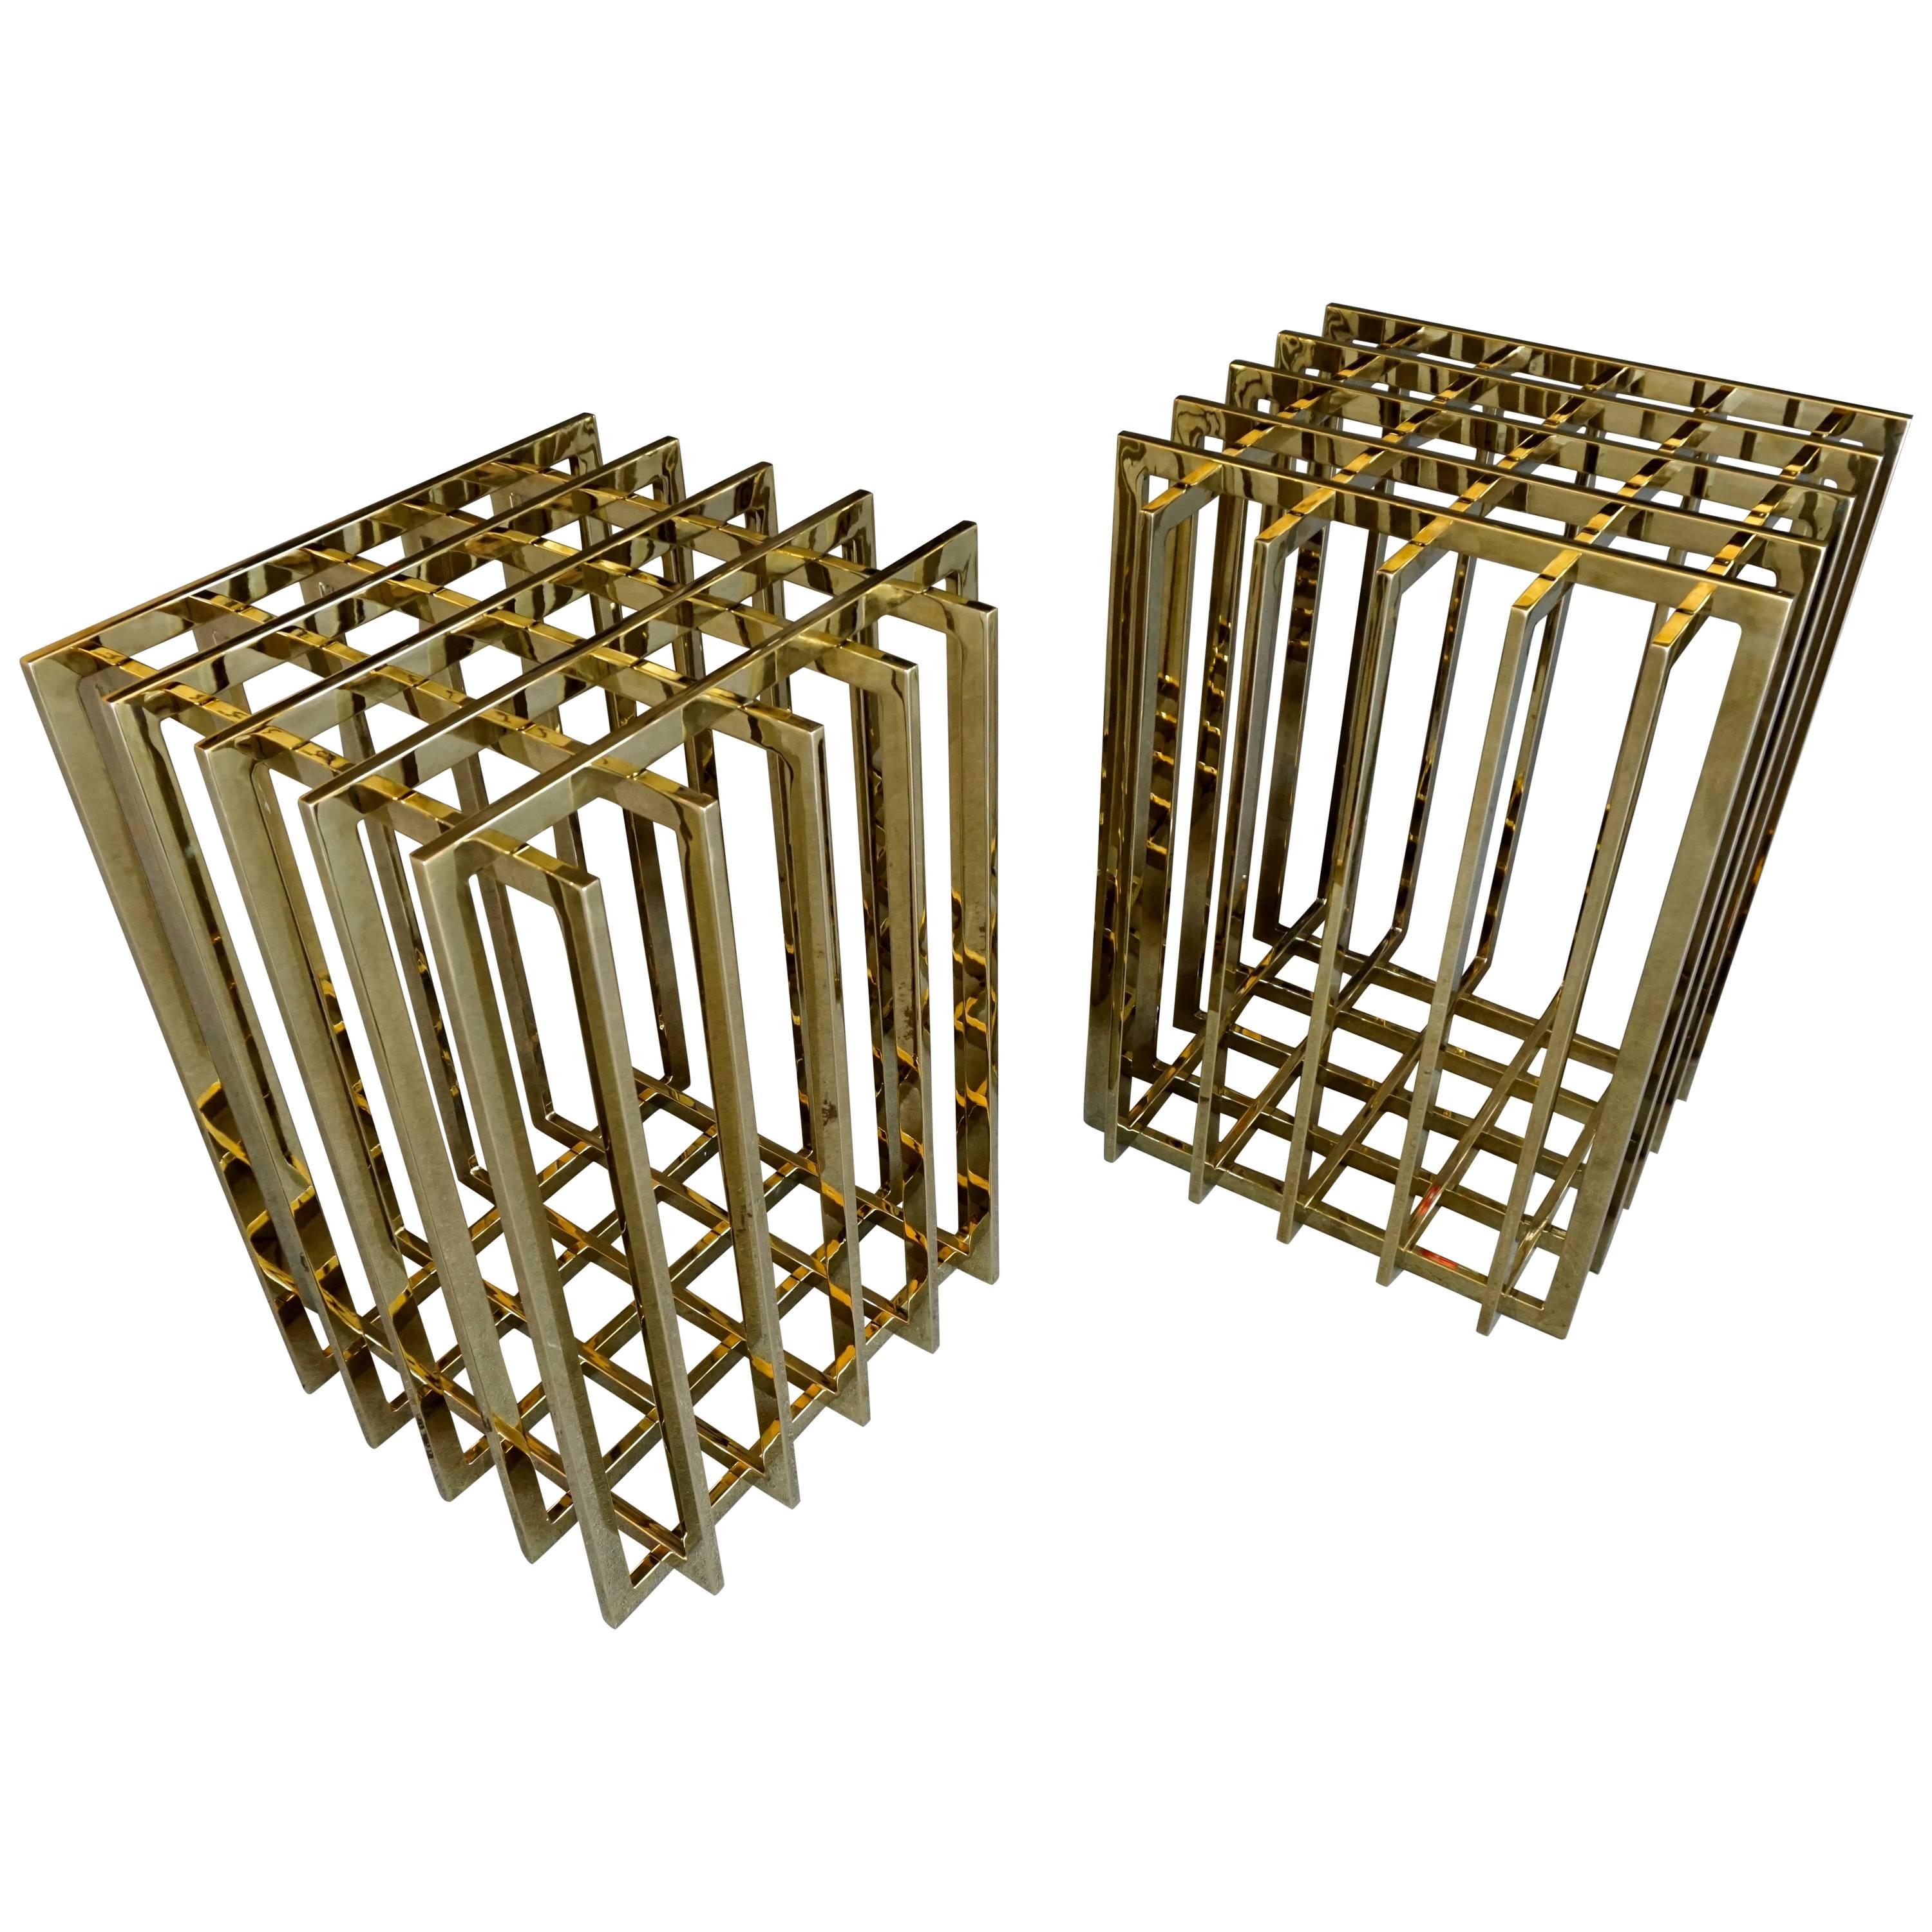 Pair of Brass-Plated Steel Cage-Form Dining Table Bases by Pierre Cardin C 1970s